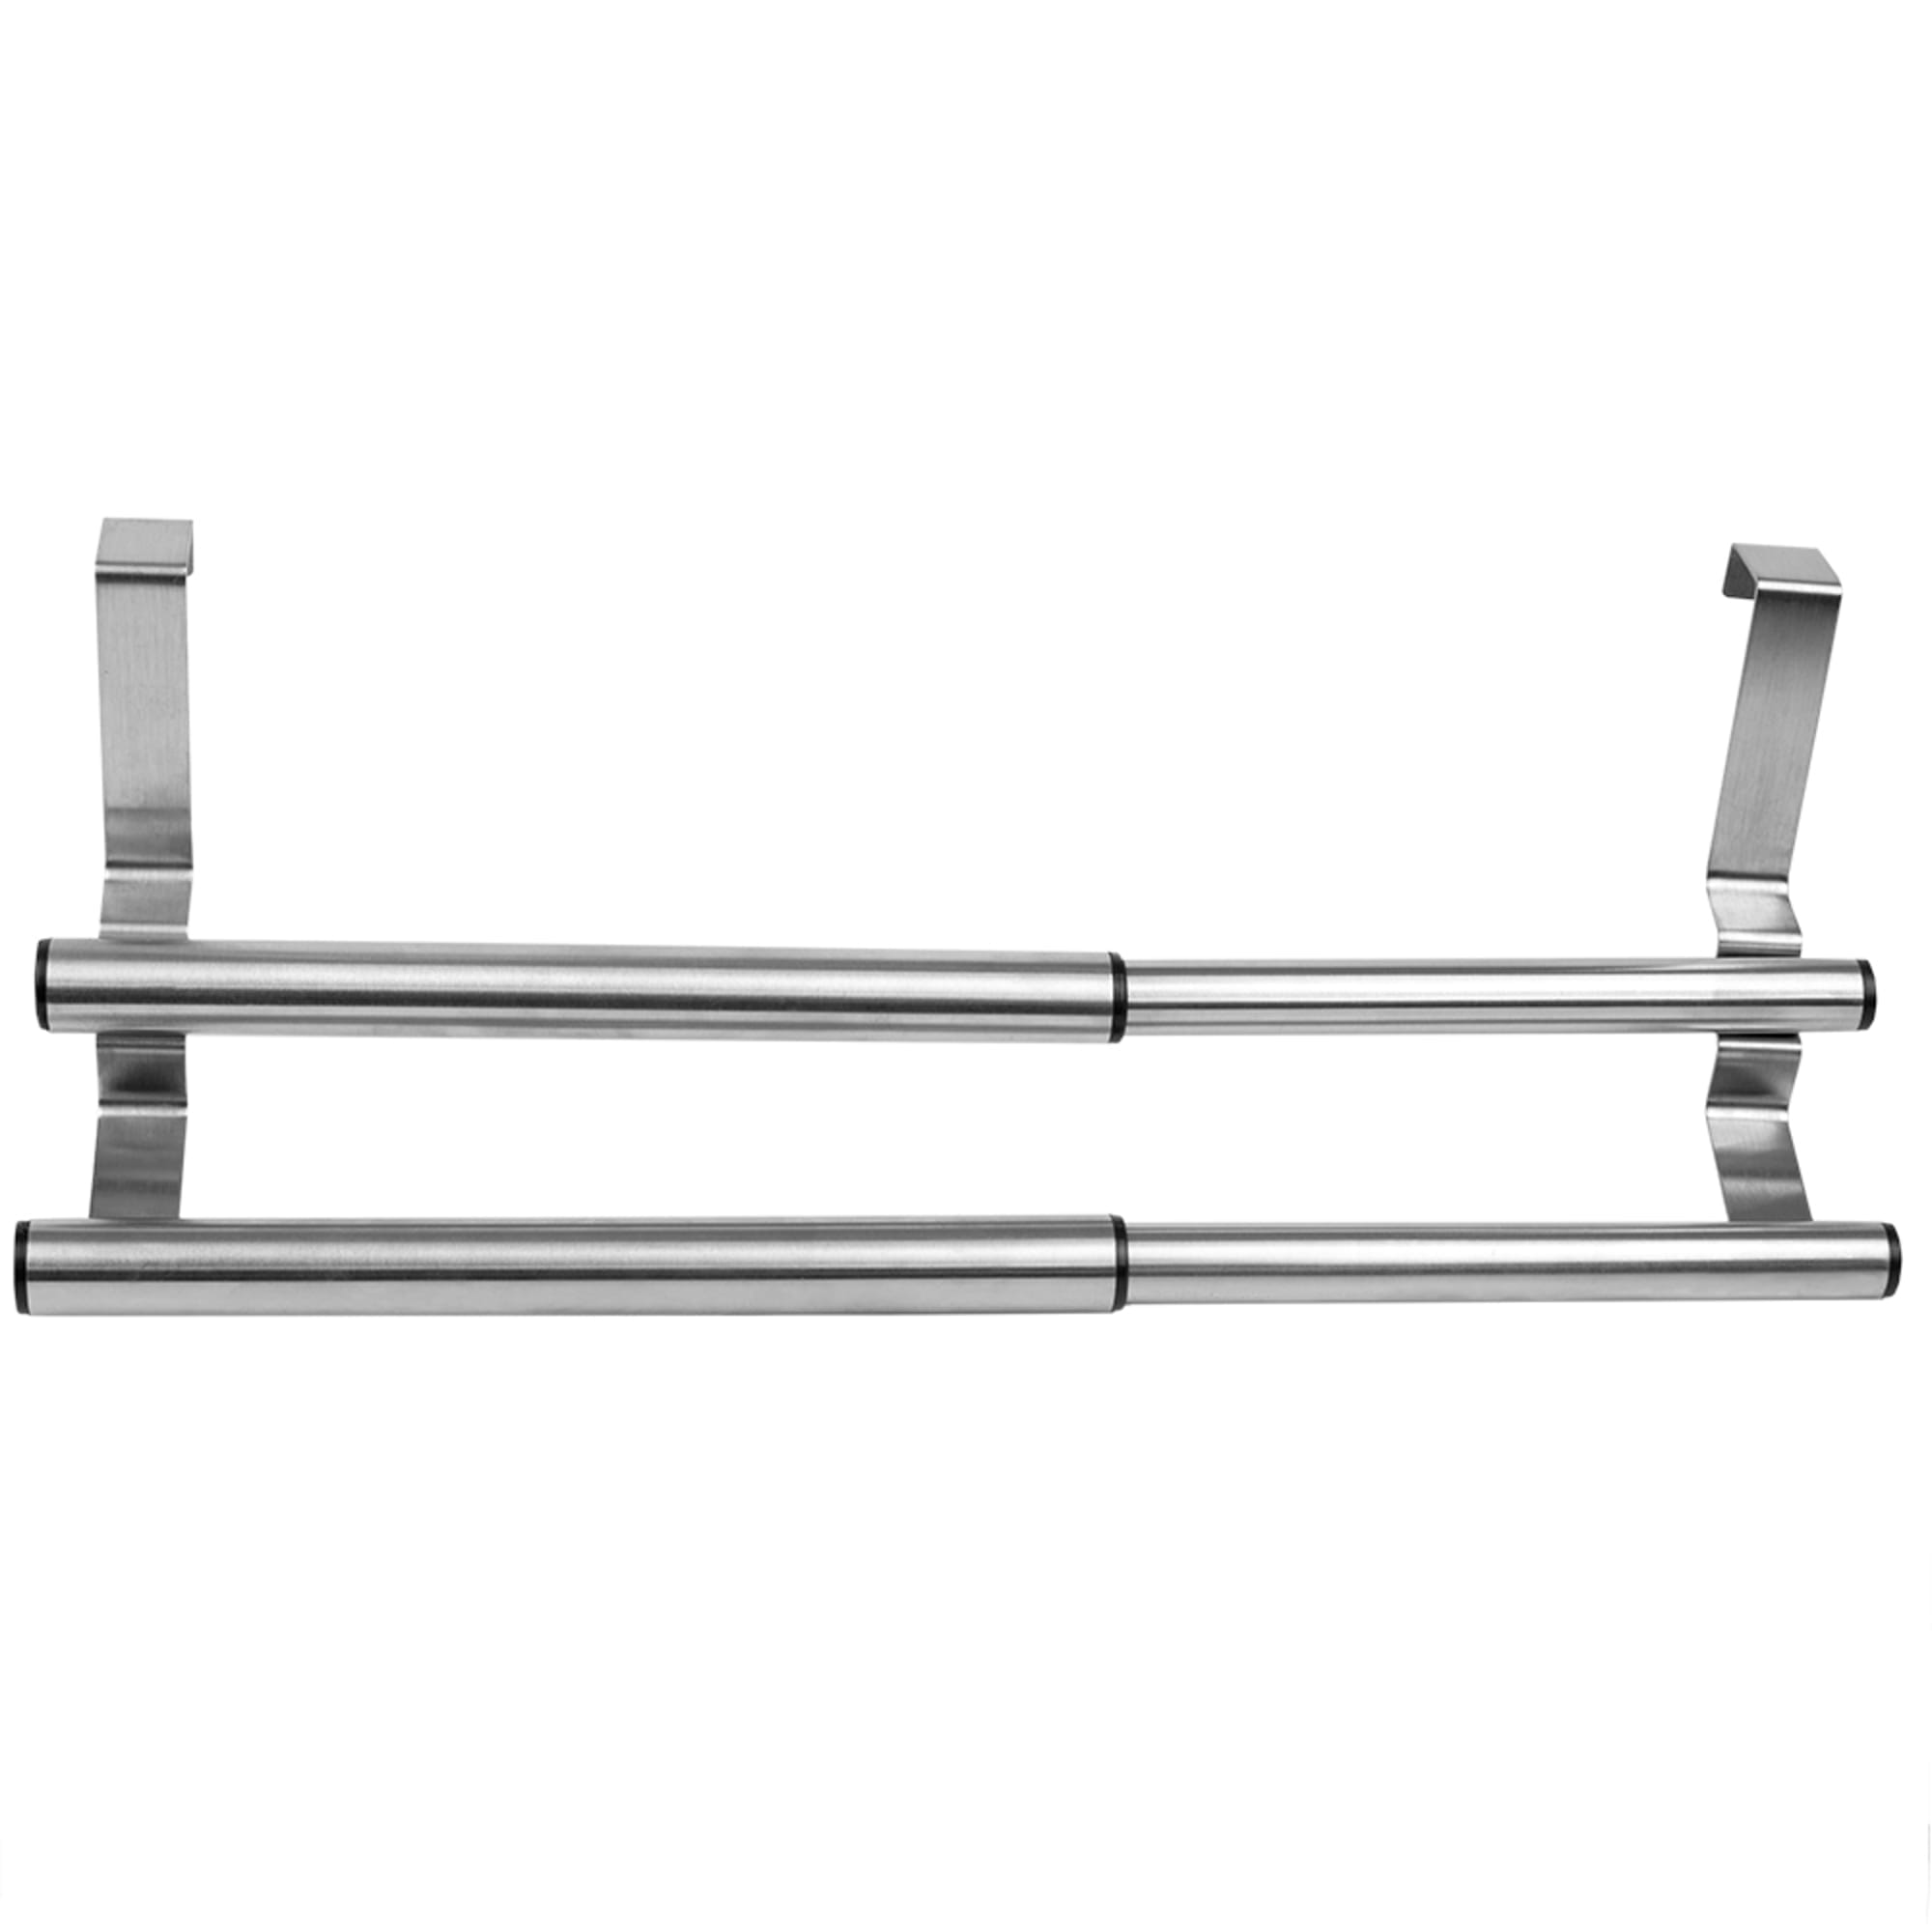 Home Basics Over the Cabinet Door Quick Install  Hanging Modern Expandable 2 Tier Steel Towel Storage Rack $4.00 EACH, CASE PACK OF 12